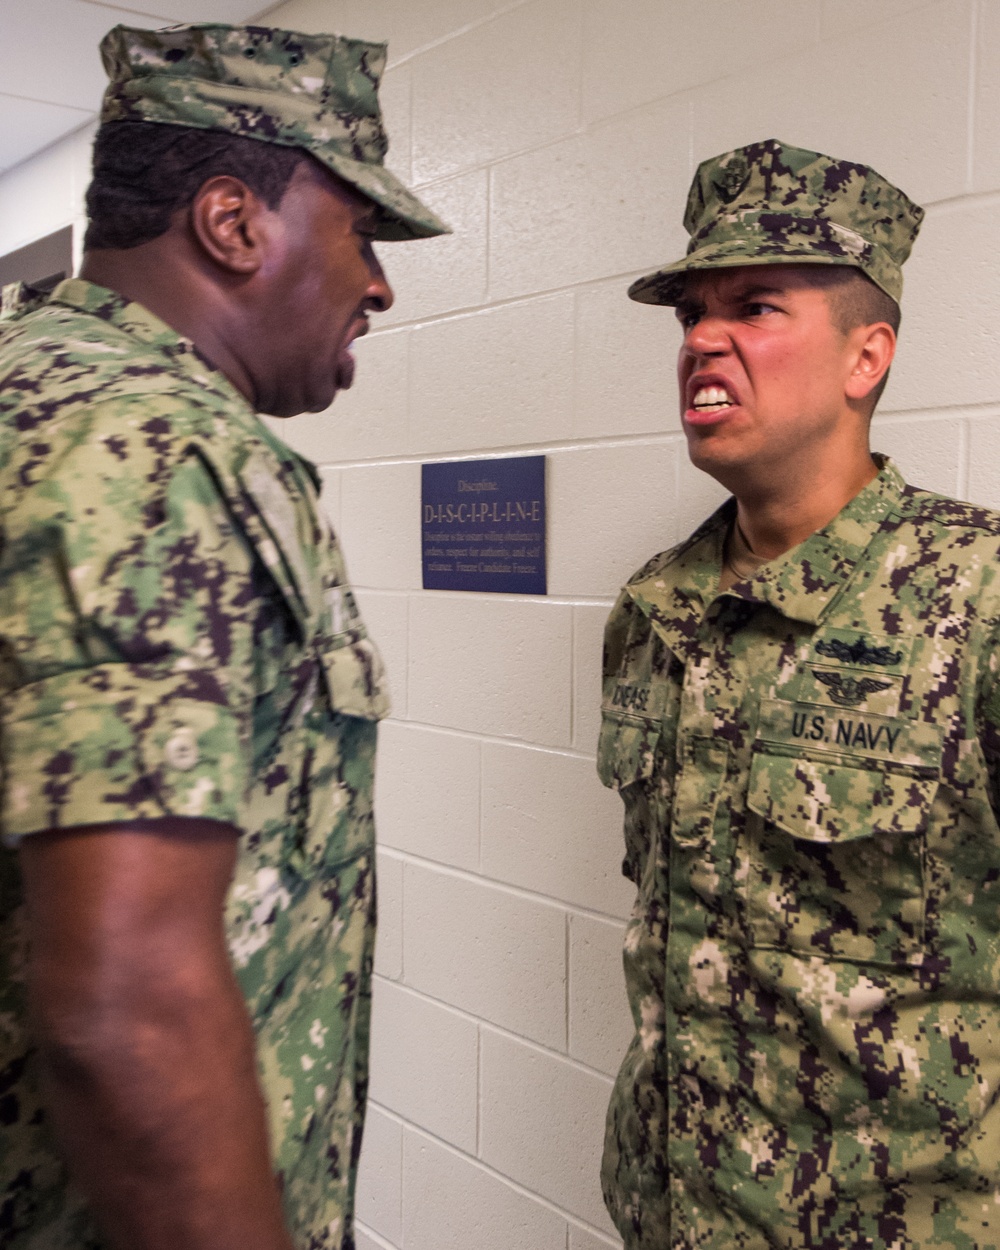 Recruit Division Commanders here at Officer Training Command in Newport, Rhode Island (OTCN) inspects uniforms as part of the Room, Locker and Personnel (RLP) inspection for Officer Candidate School (OCS) class 02-20 on Sept. 5, 2019.